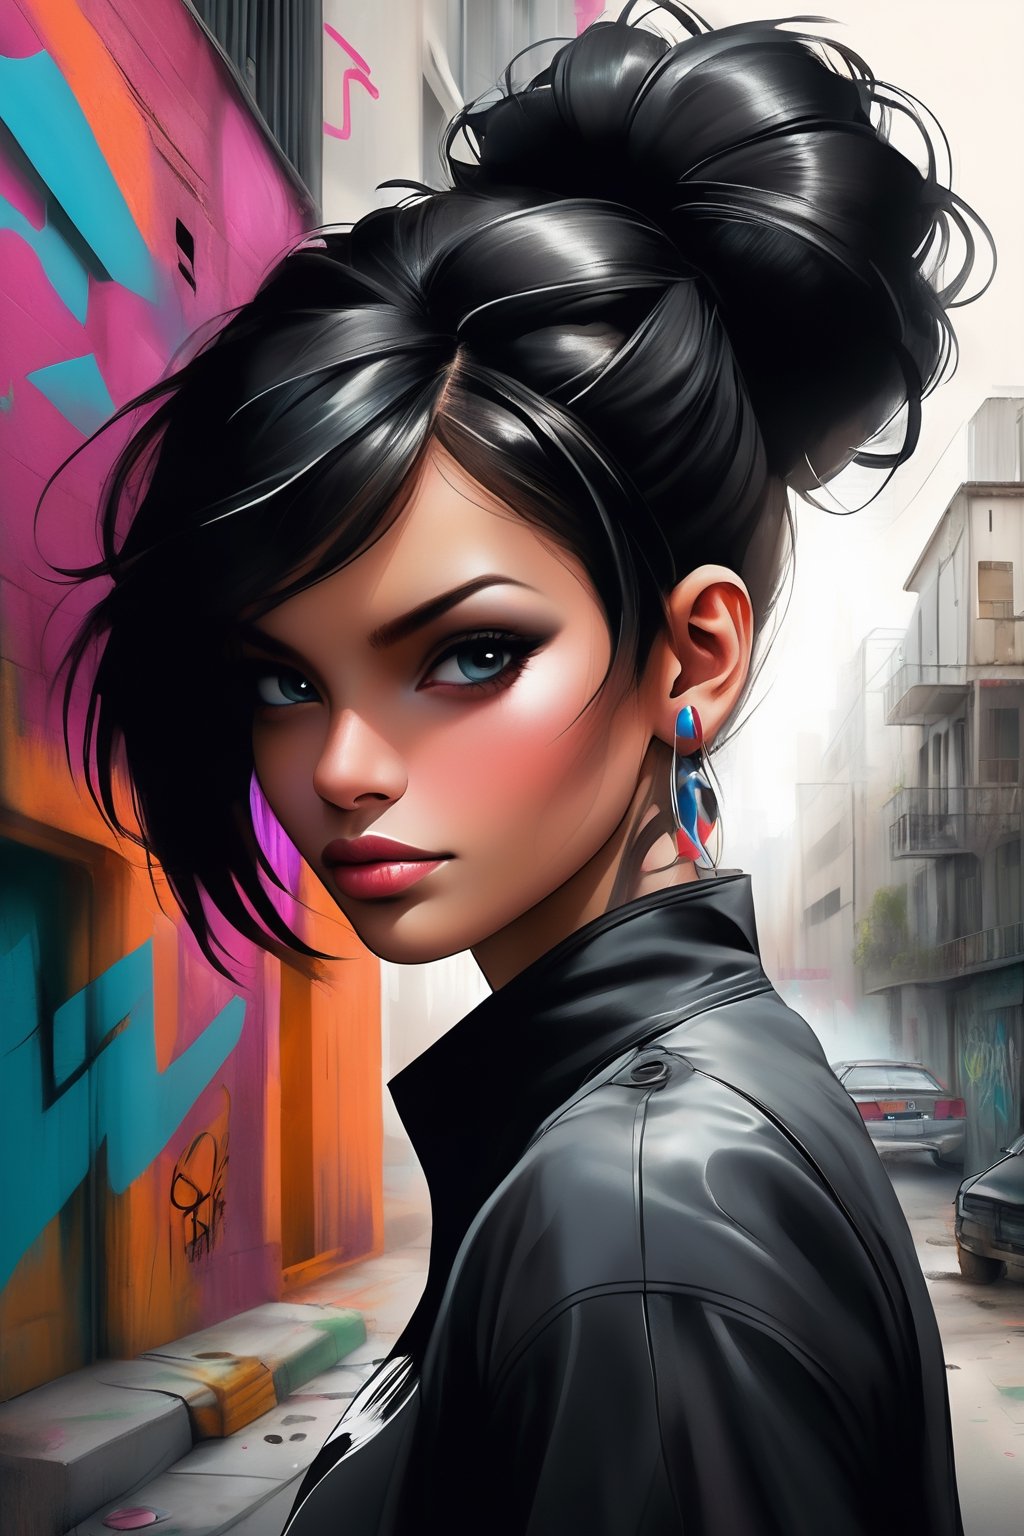 A captivating pencil art illustration of a female portrait, blending the rebellious spirit of street art with the elegance of portraiture. The subject has a bold and striking appearance, with her eyes gazing confidently at the viewer. Her hair is styled in a way that suggests a connection to urban culture, while her attire is a mix of casual and sophisticated elements. The background features a vibrant cityscape, with graffiti-filled walls and dynamic shapes that complement the subject's allure. The artwork exudes a sense of individuality and self-expression, celebrating the diversity and dynamism of contemporary society.